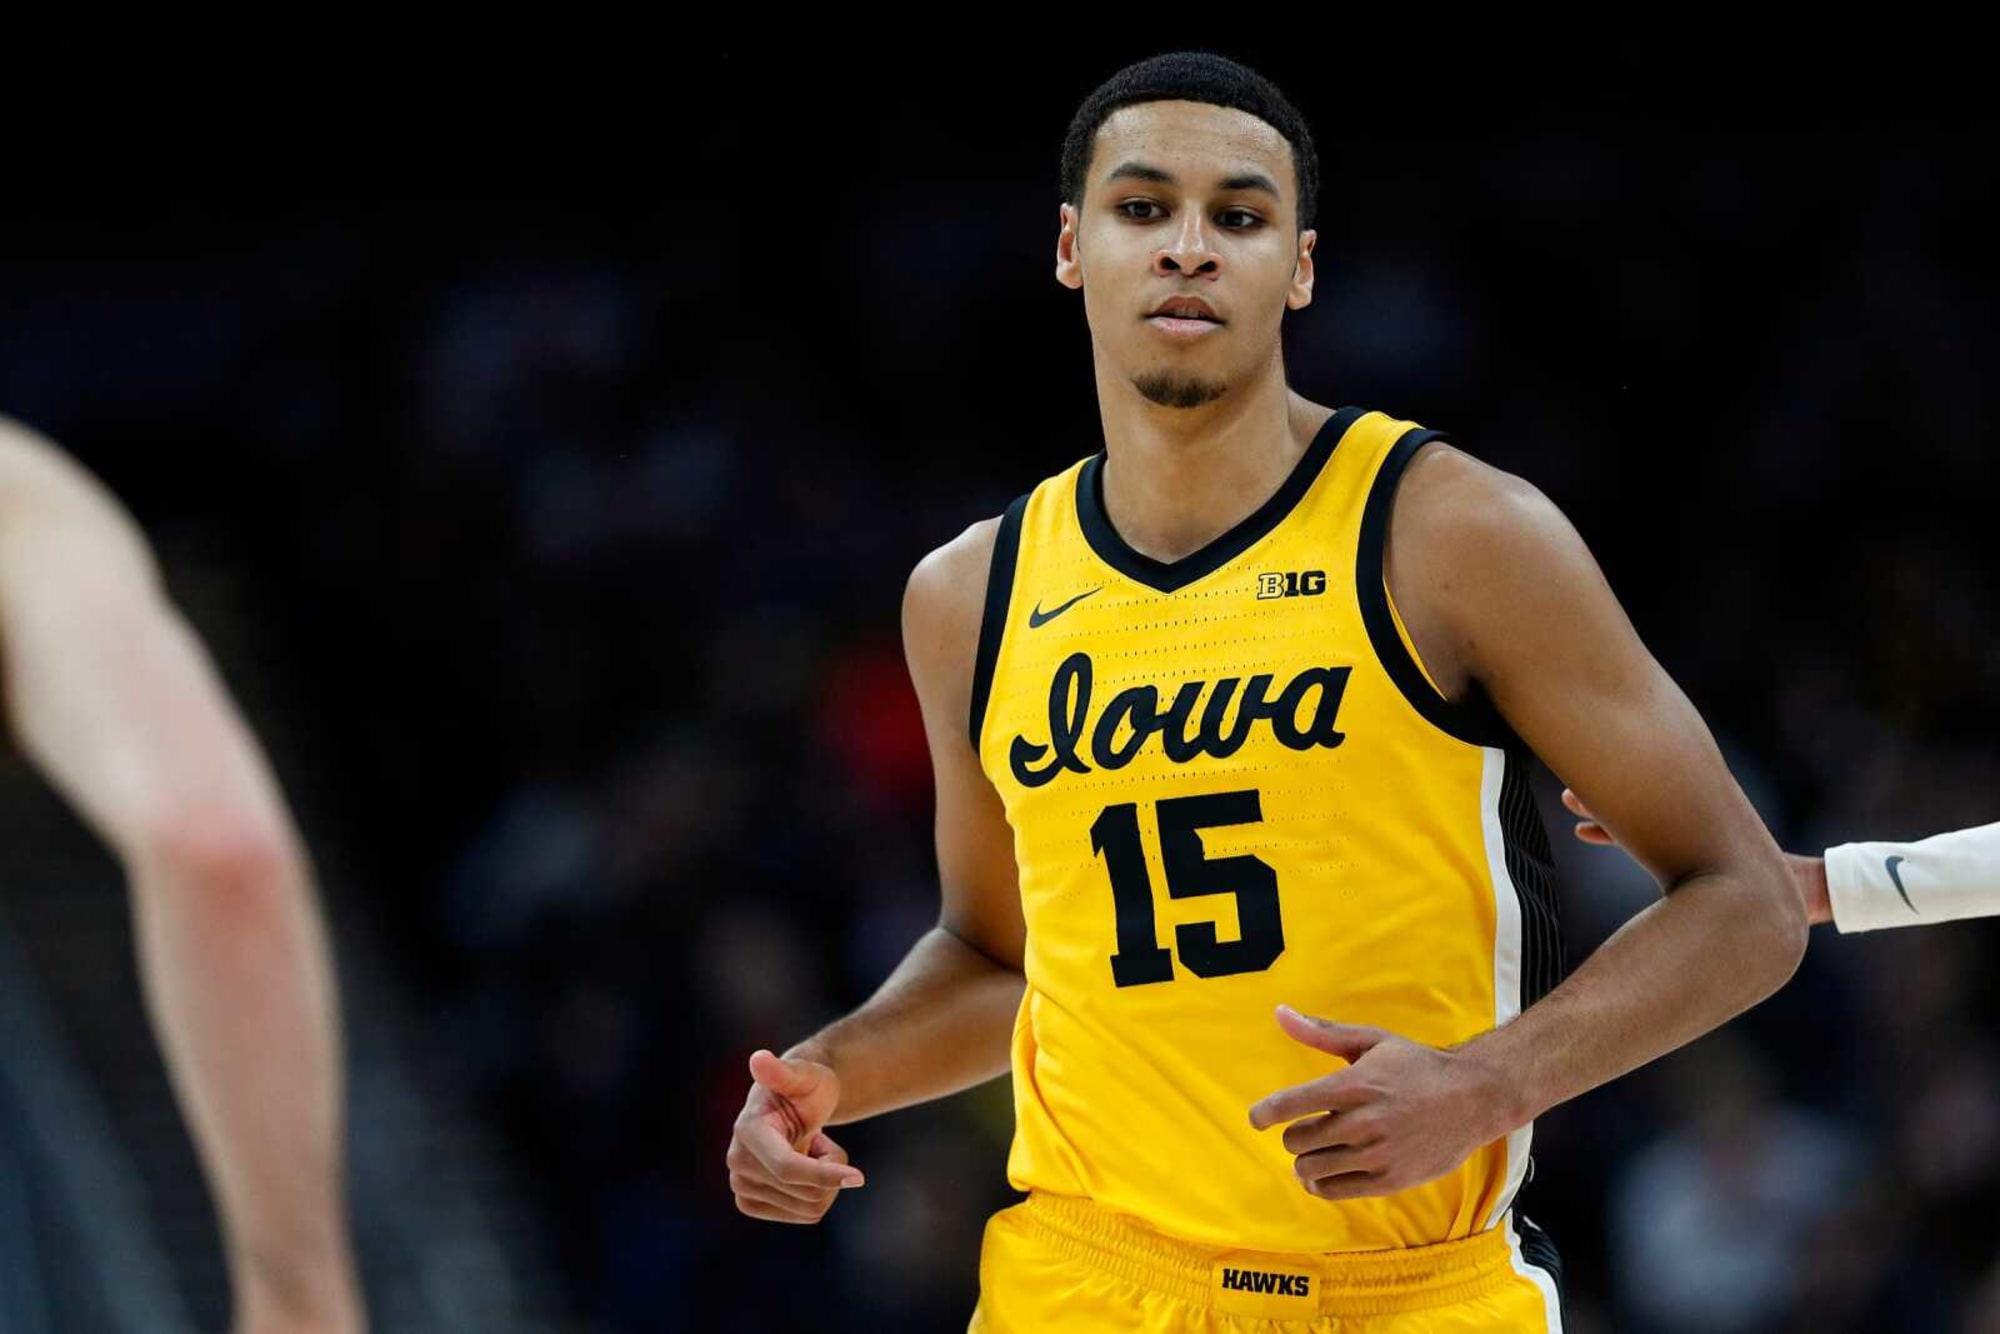 Indiana Pacers 2022 NBA Draft Mock roundup before the lottery